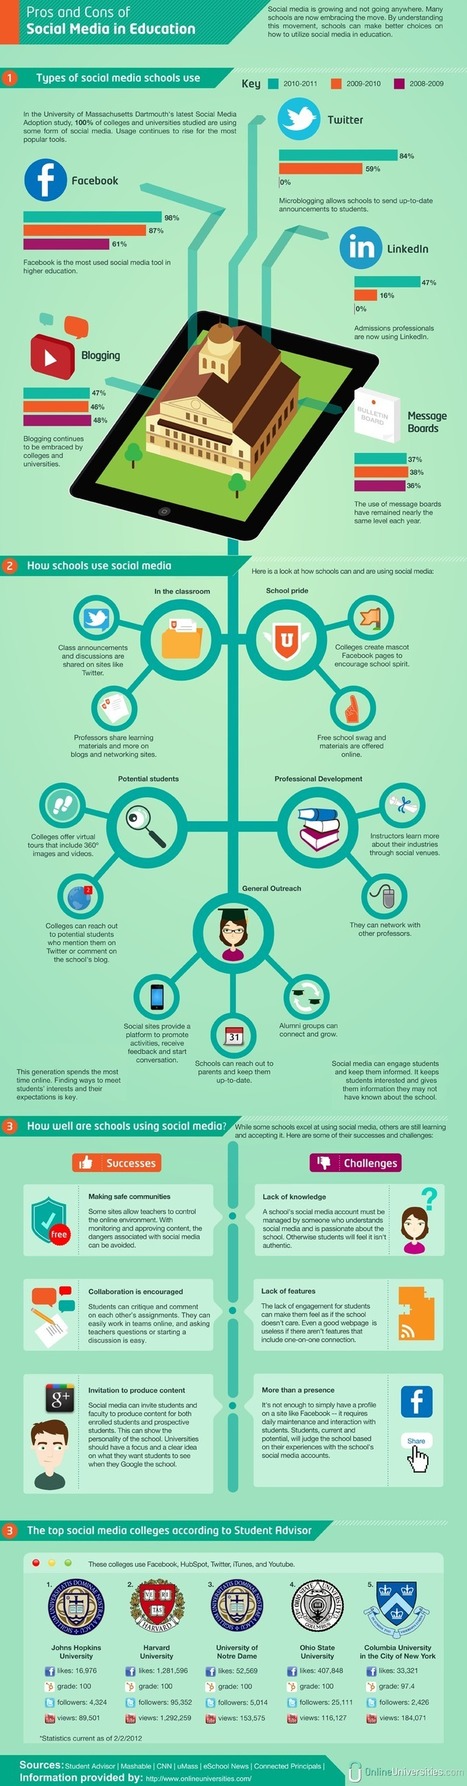 Pros and Cons of Social Media in Education, INFOGRAPHIC > Big Universities today, Disruption Tomorrow? | gpmt | Scoop.it